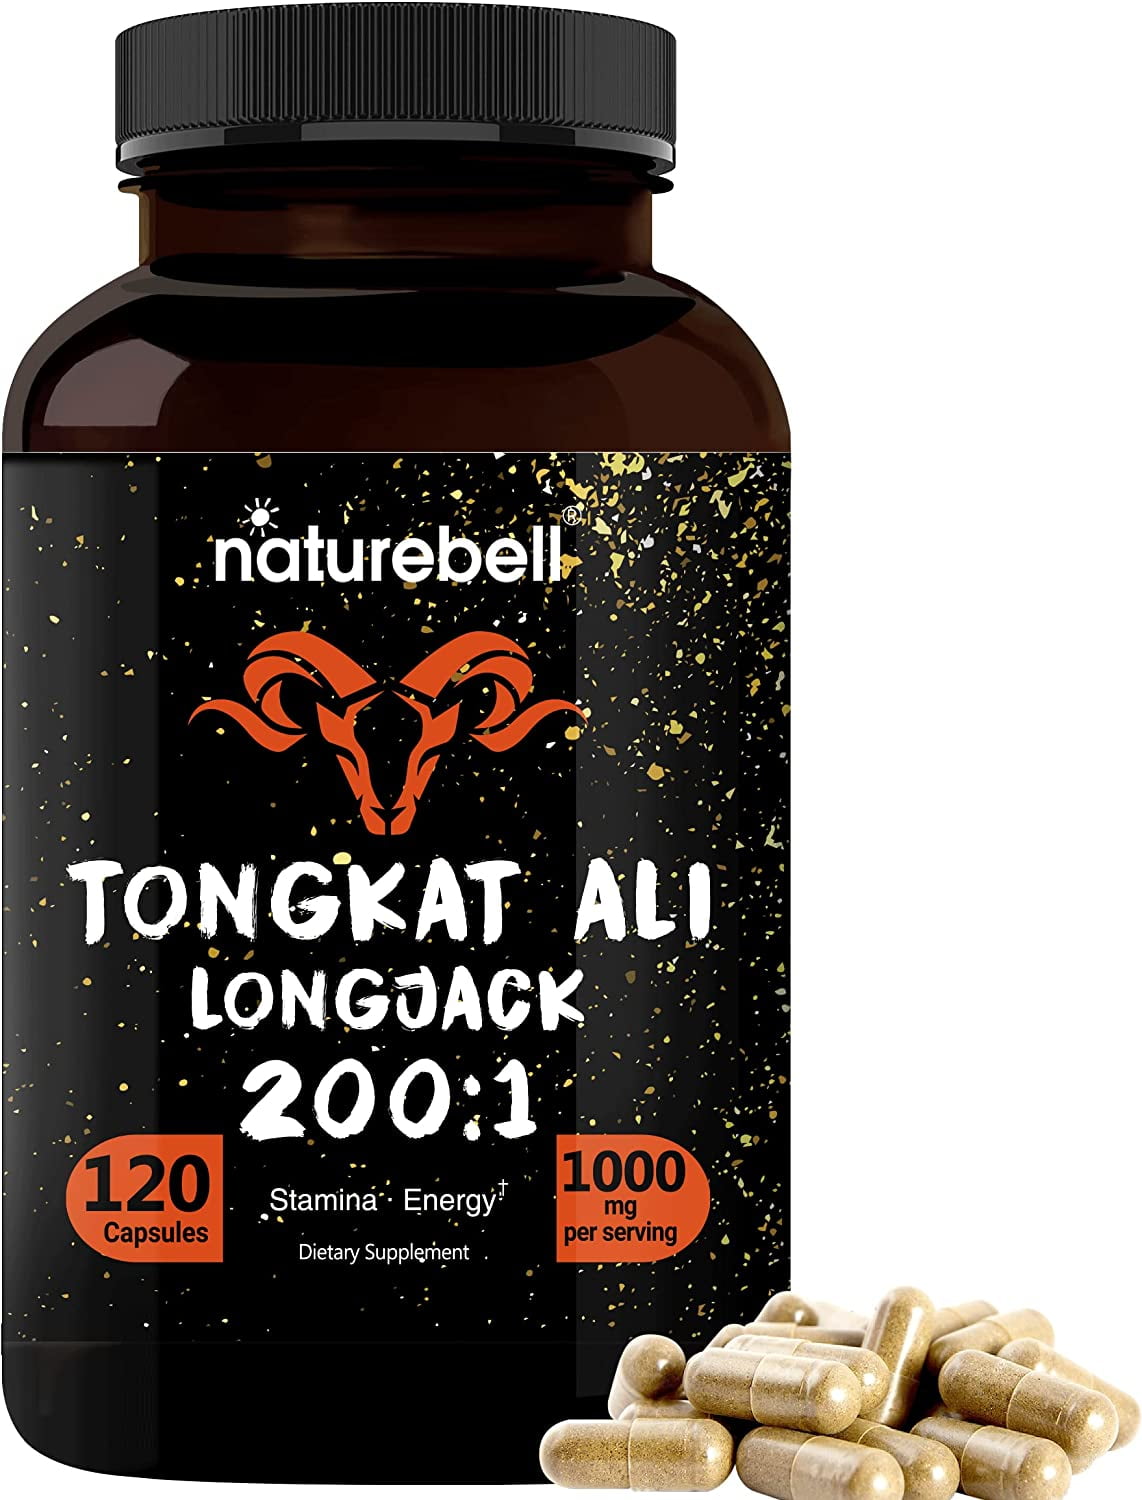 Tongkat Ali 200:1 as Long Jack Extract (Eurycoma Longifolia), 1000mg Per  Serving, 120 Capsules, Supports Energy, Stamina and Immune System for Men  and Women, Indonesia Origin, Non-GMO 